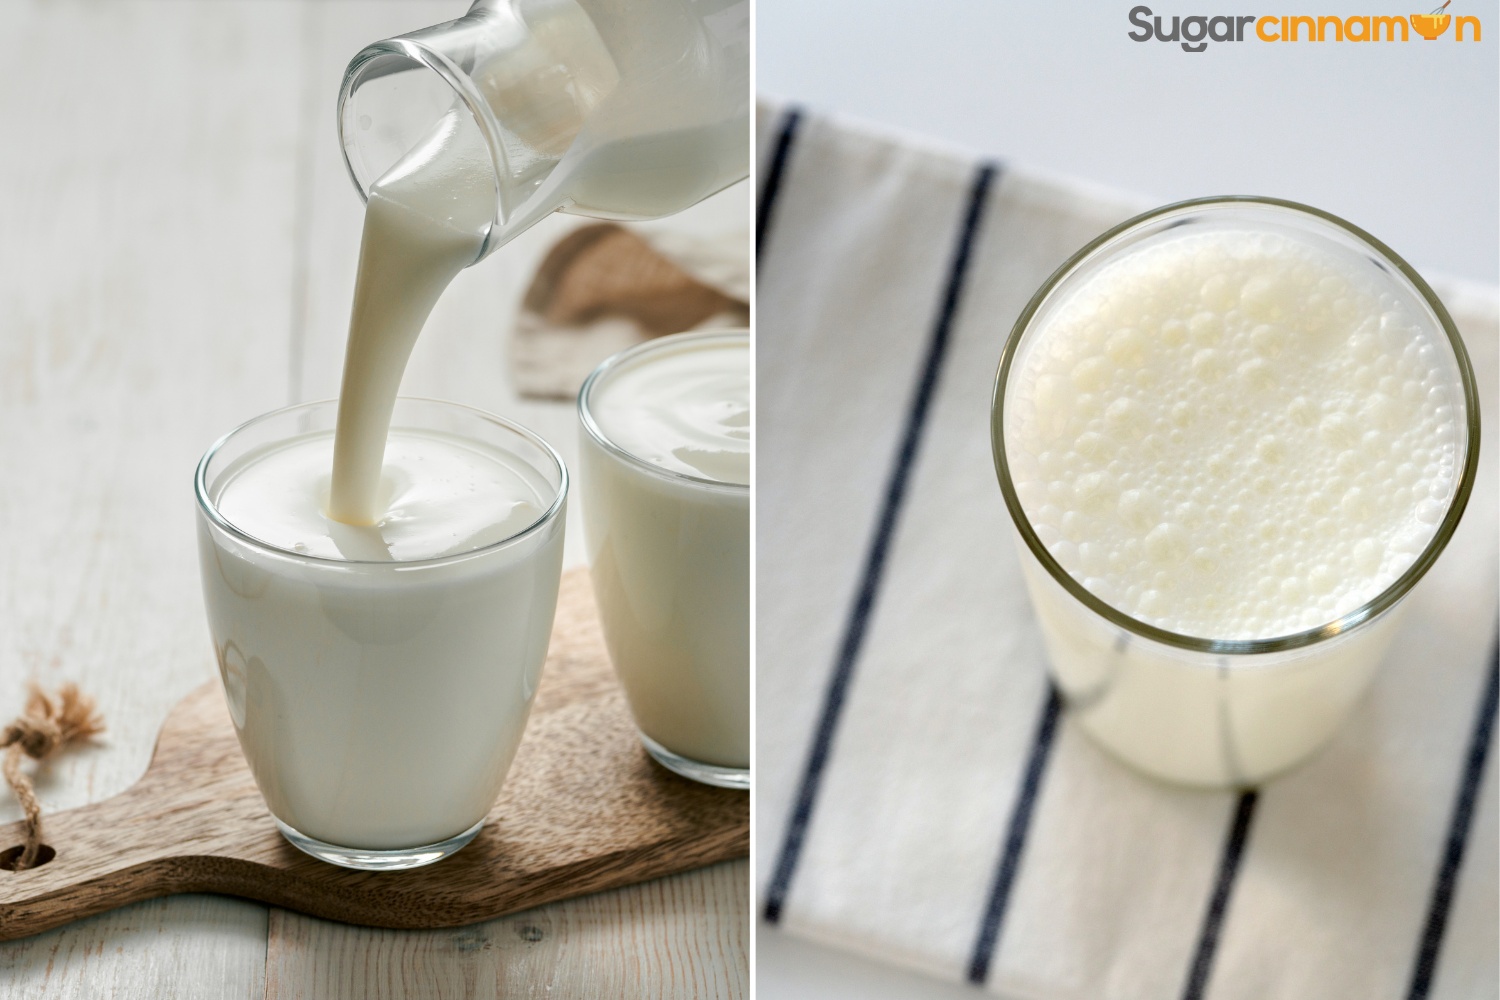 Does Butter Milk Smell Sour? (What You Should Know)